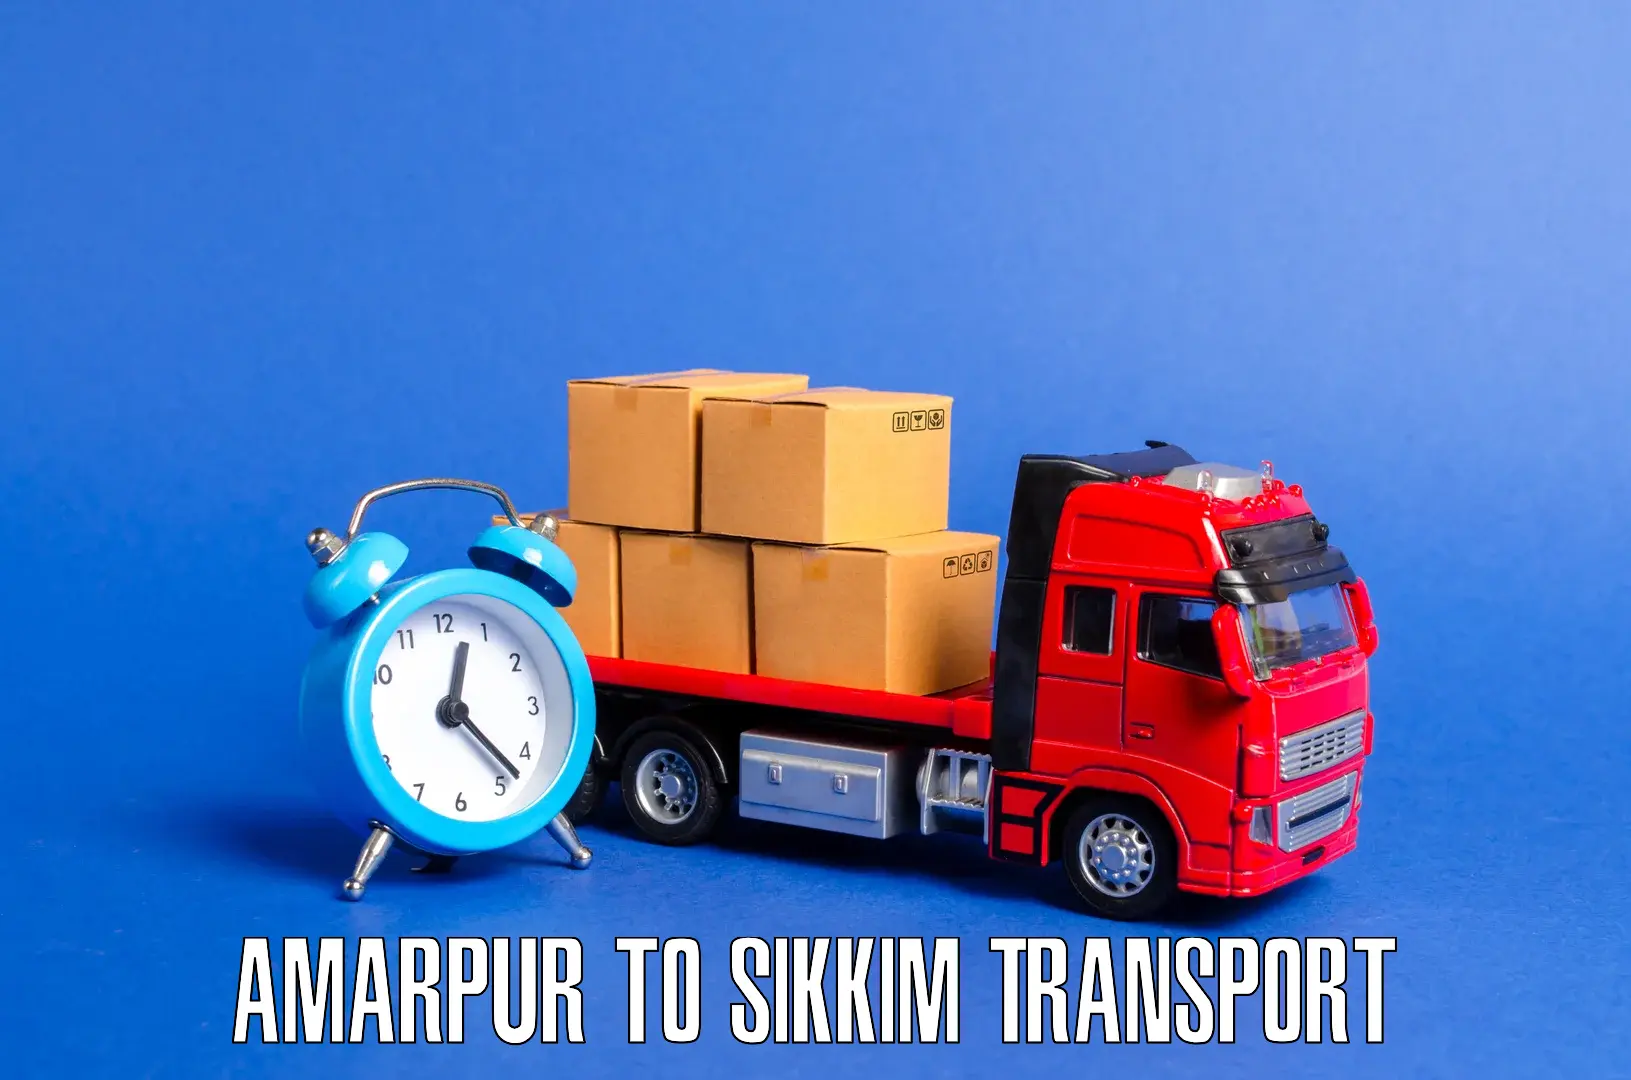 Daily transport service Amarpur to Pelling